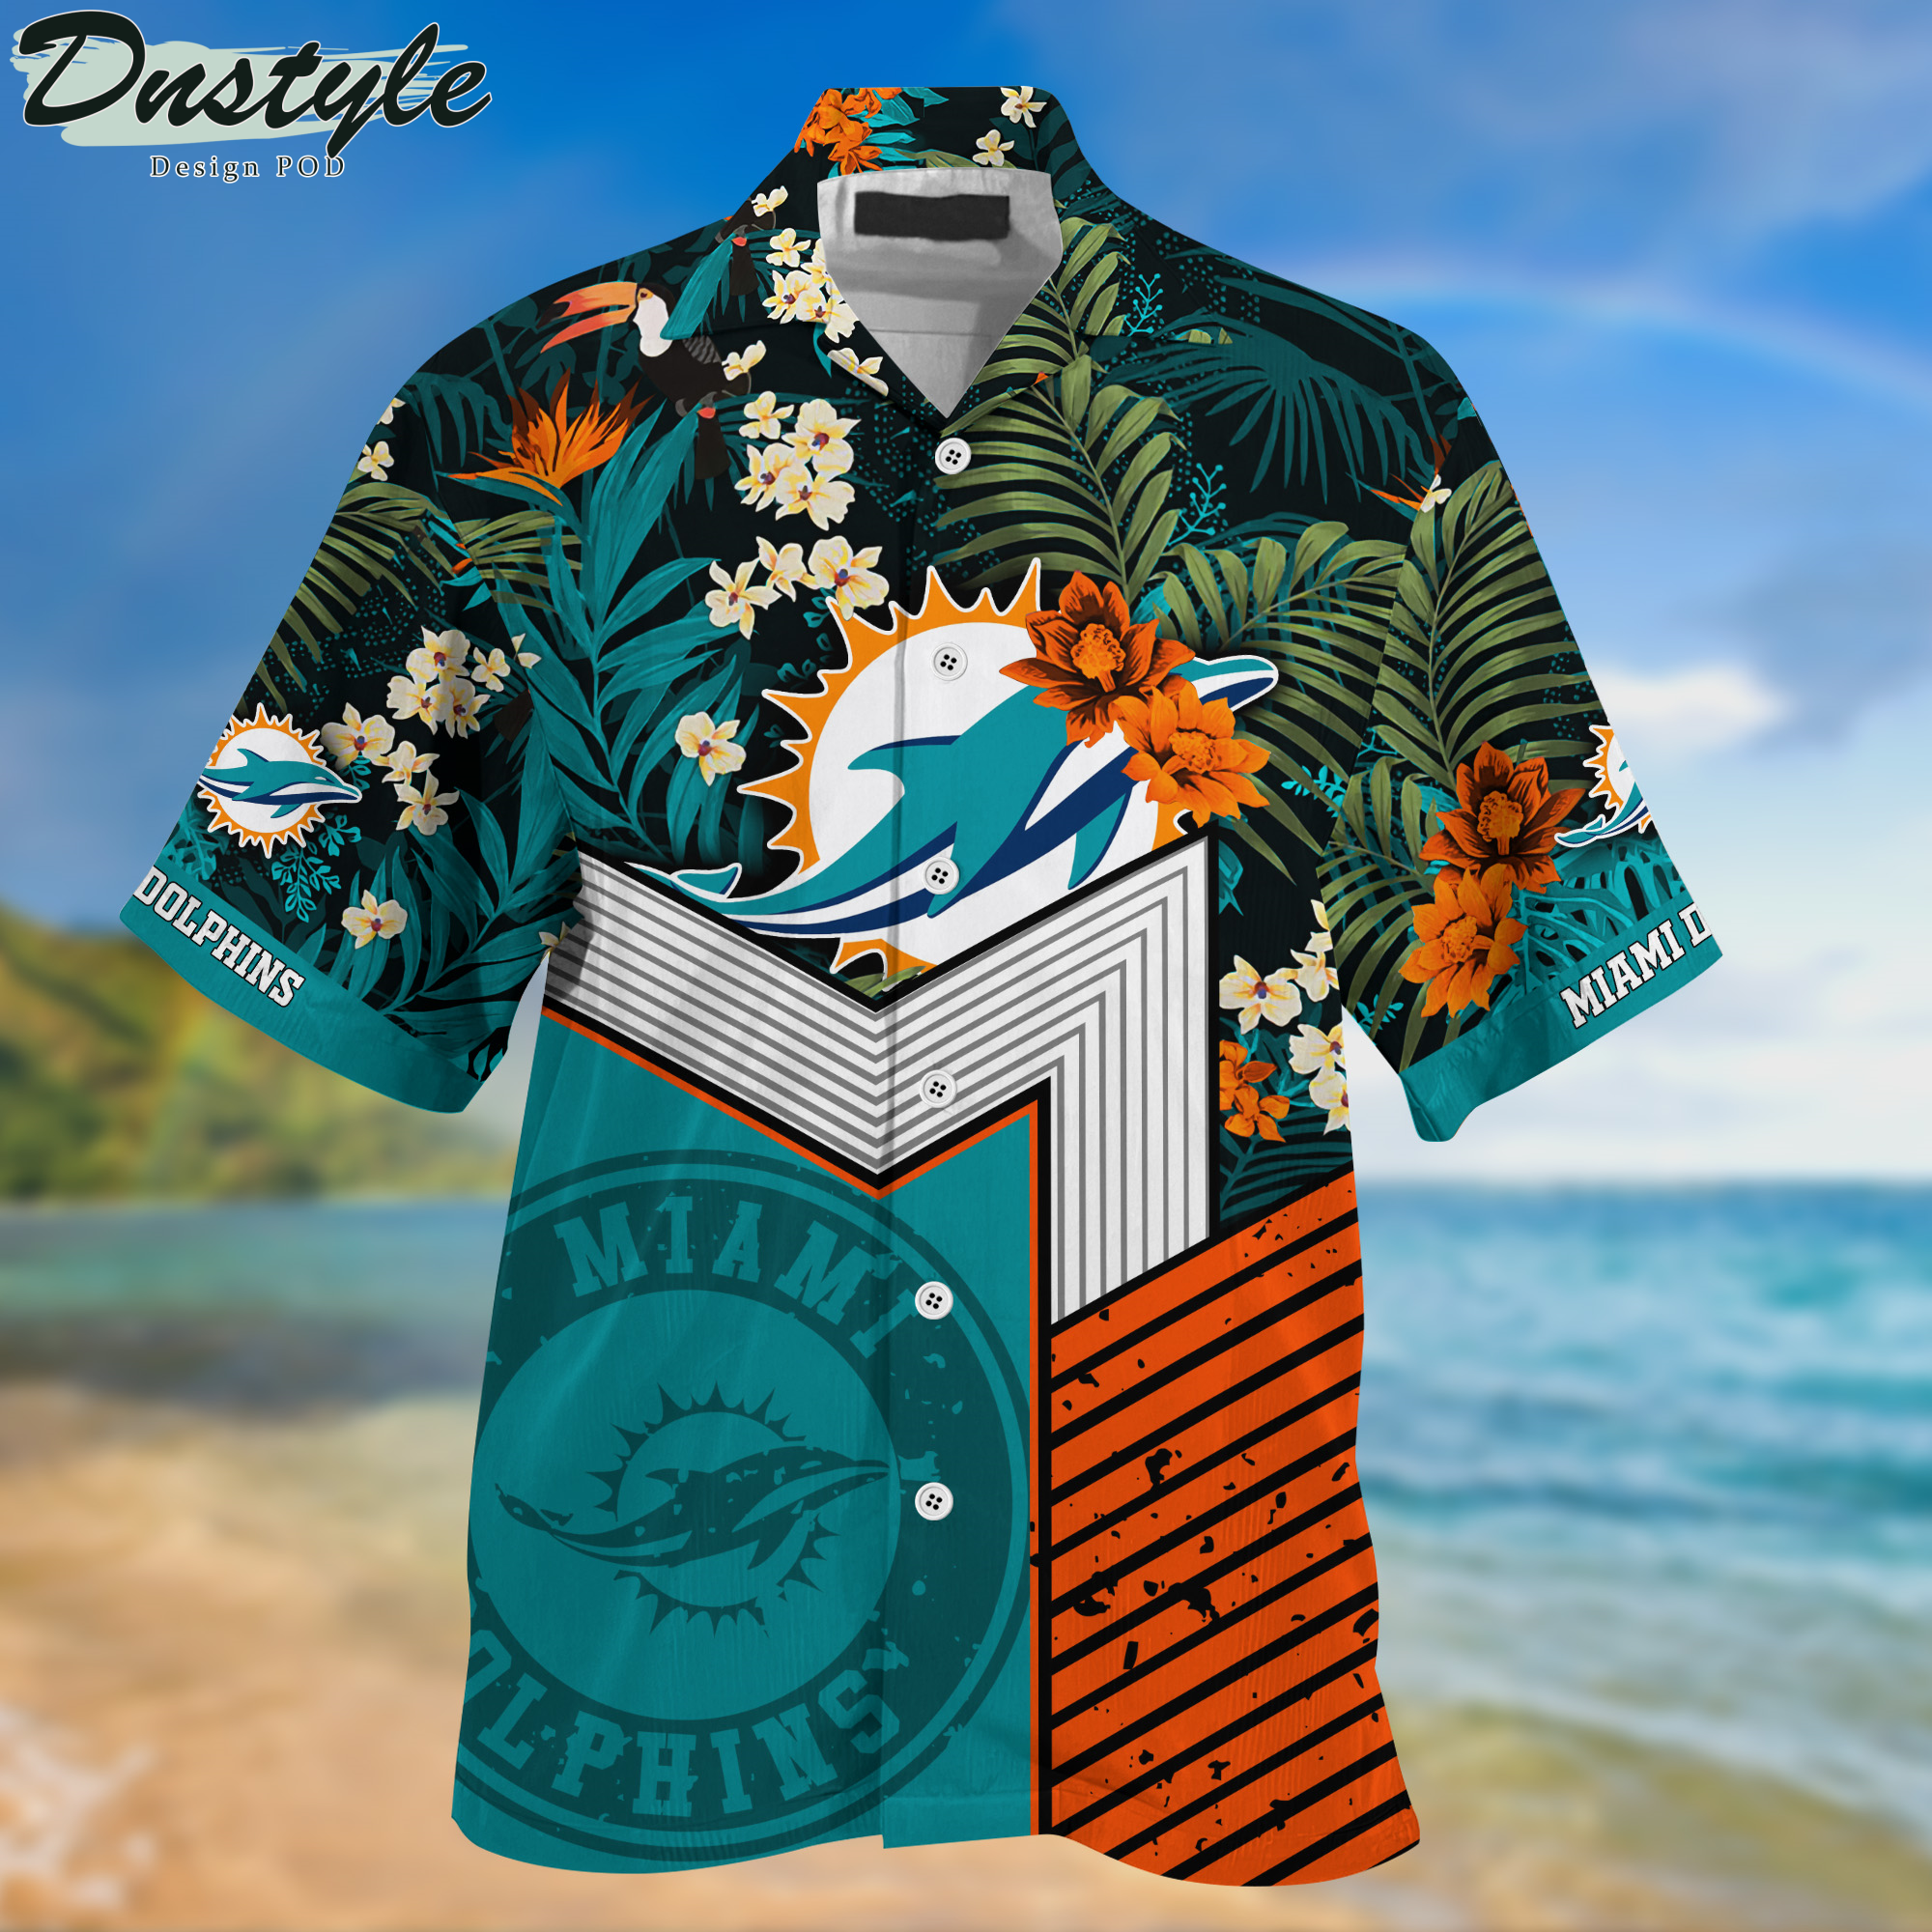 Miami Dolphins Hawaii Shirt And Shorts New Collection